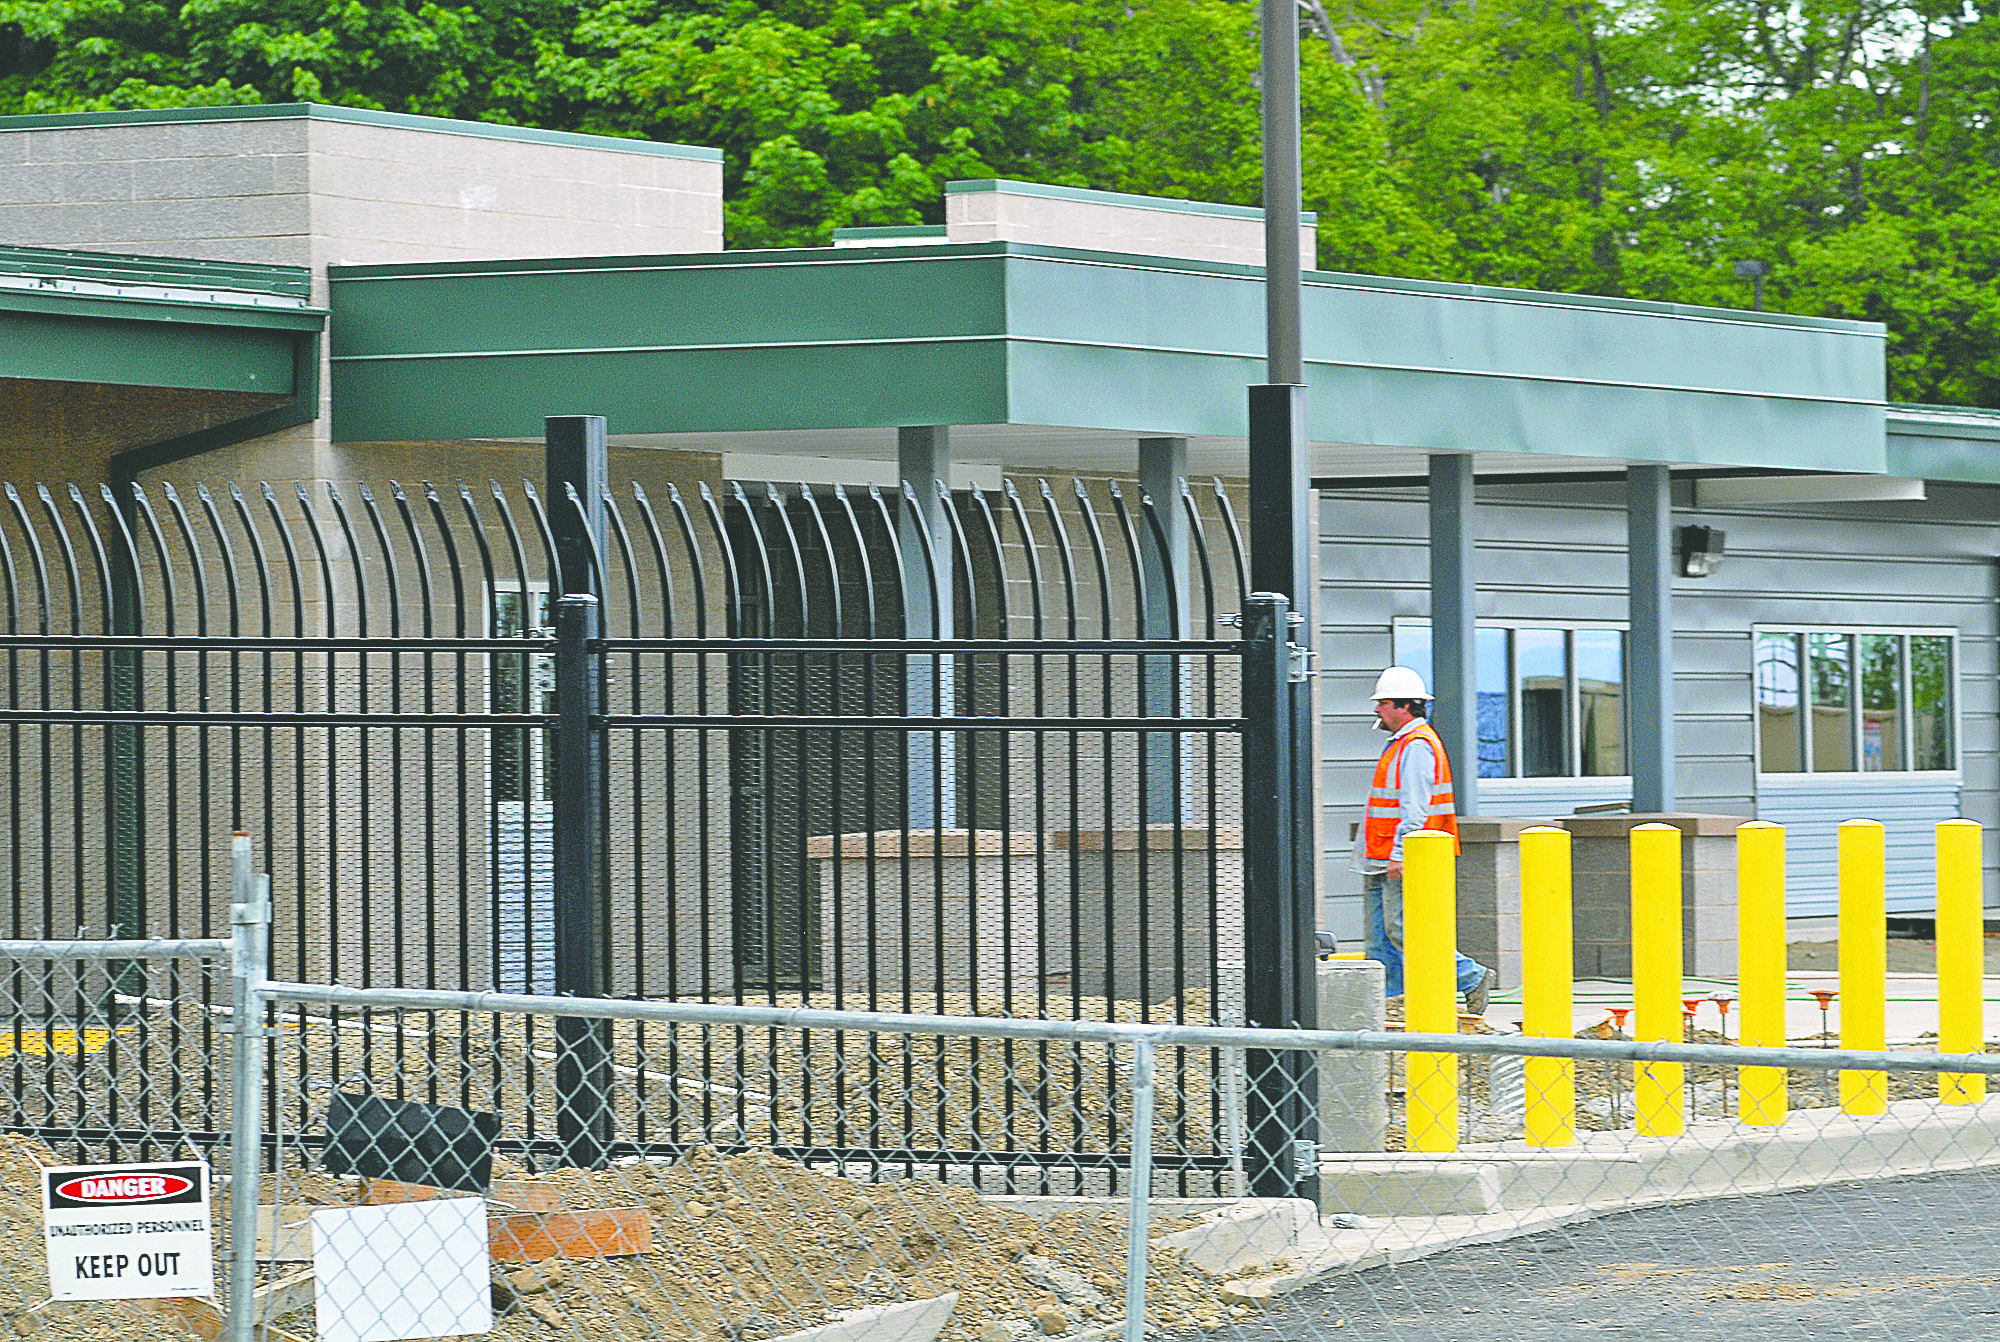 The new Border Patrol station in Port Angeles includes a spiked fence